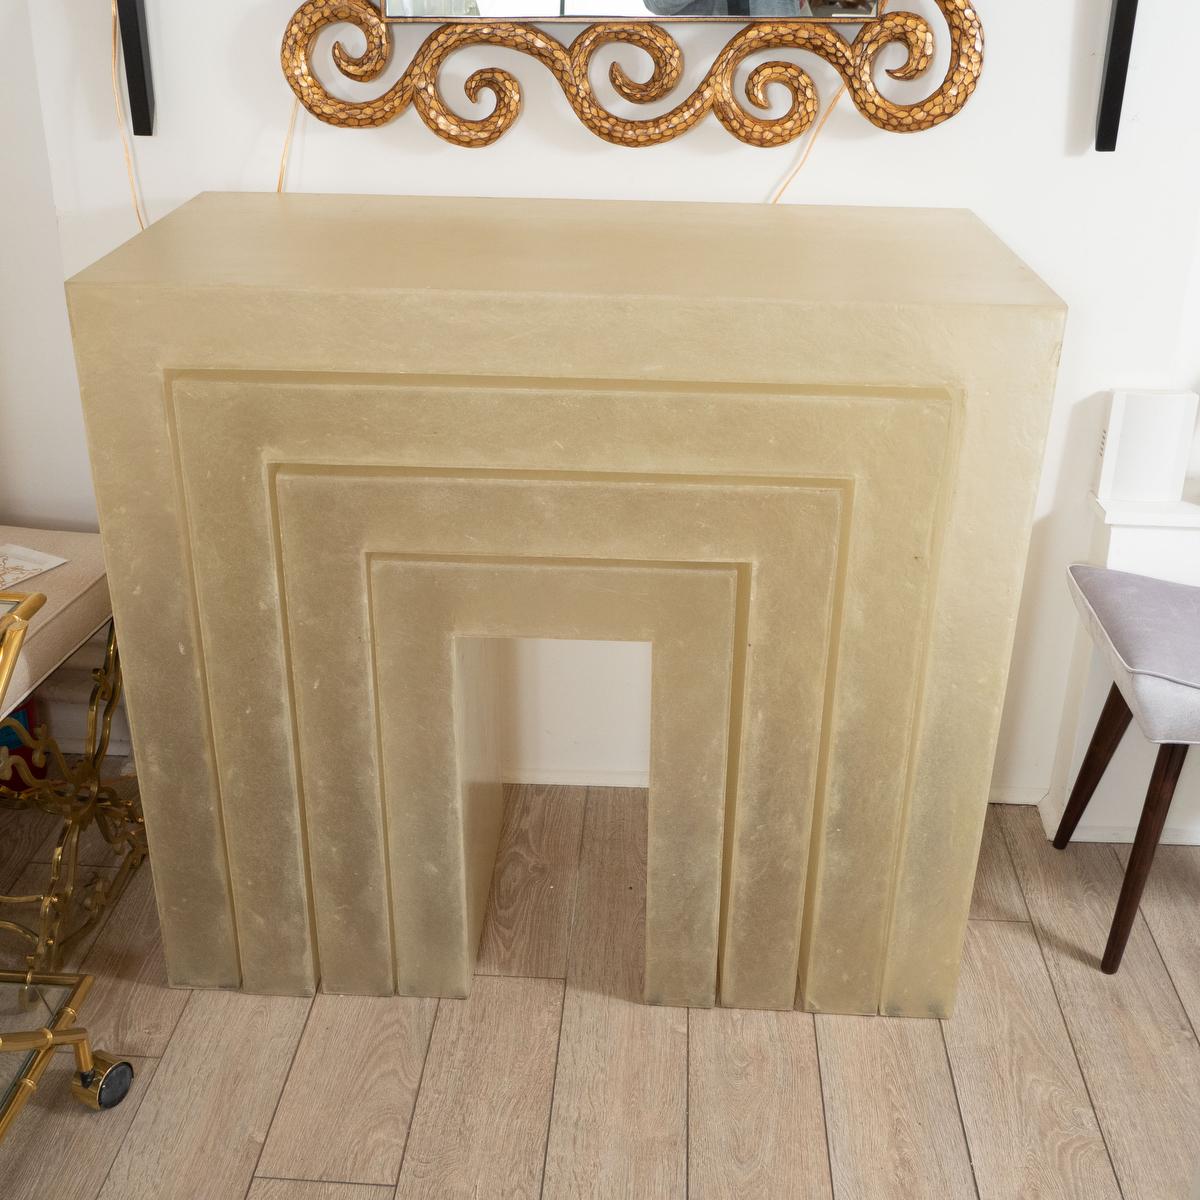 Unusual set of four resin nesting console tables.